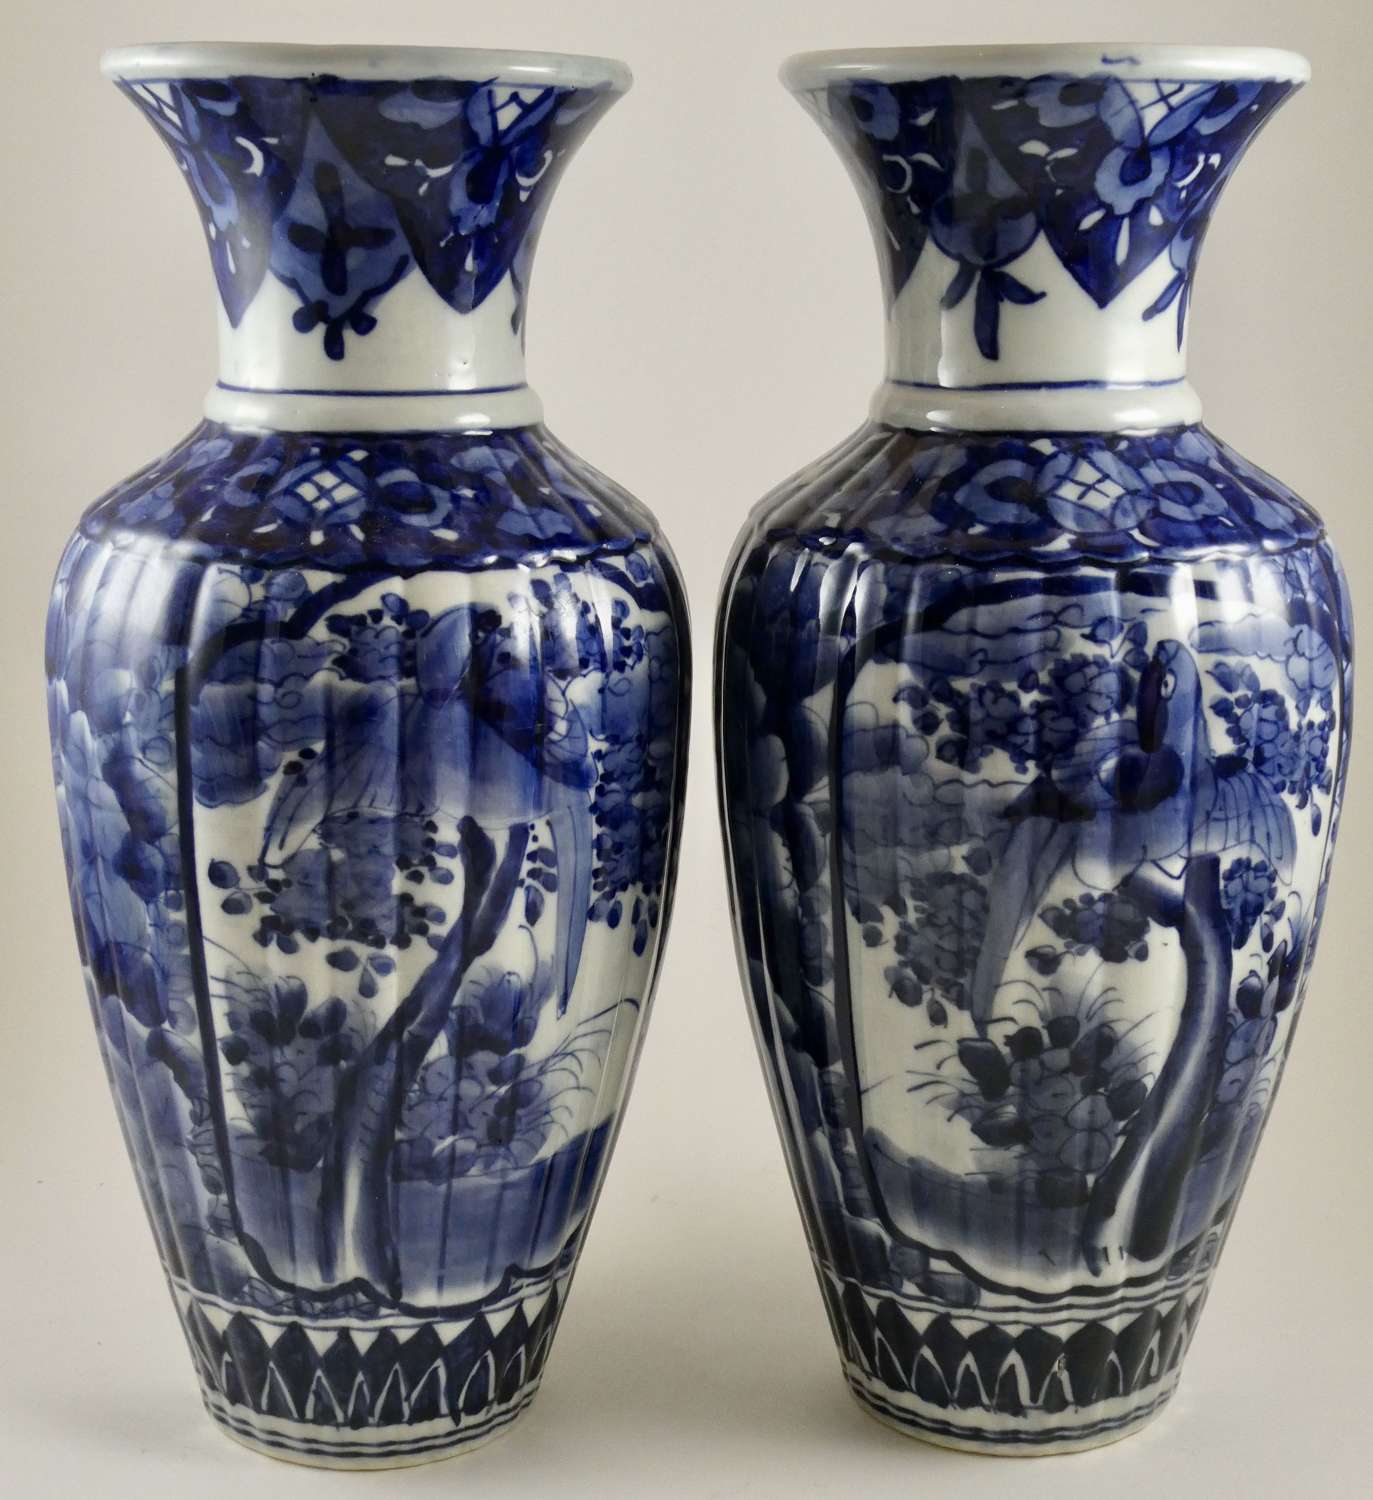 Pair of Meiji Period Blue and White Vases